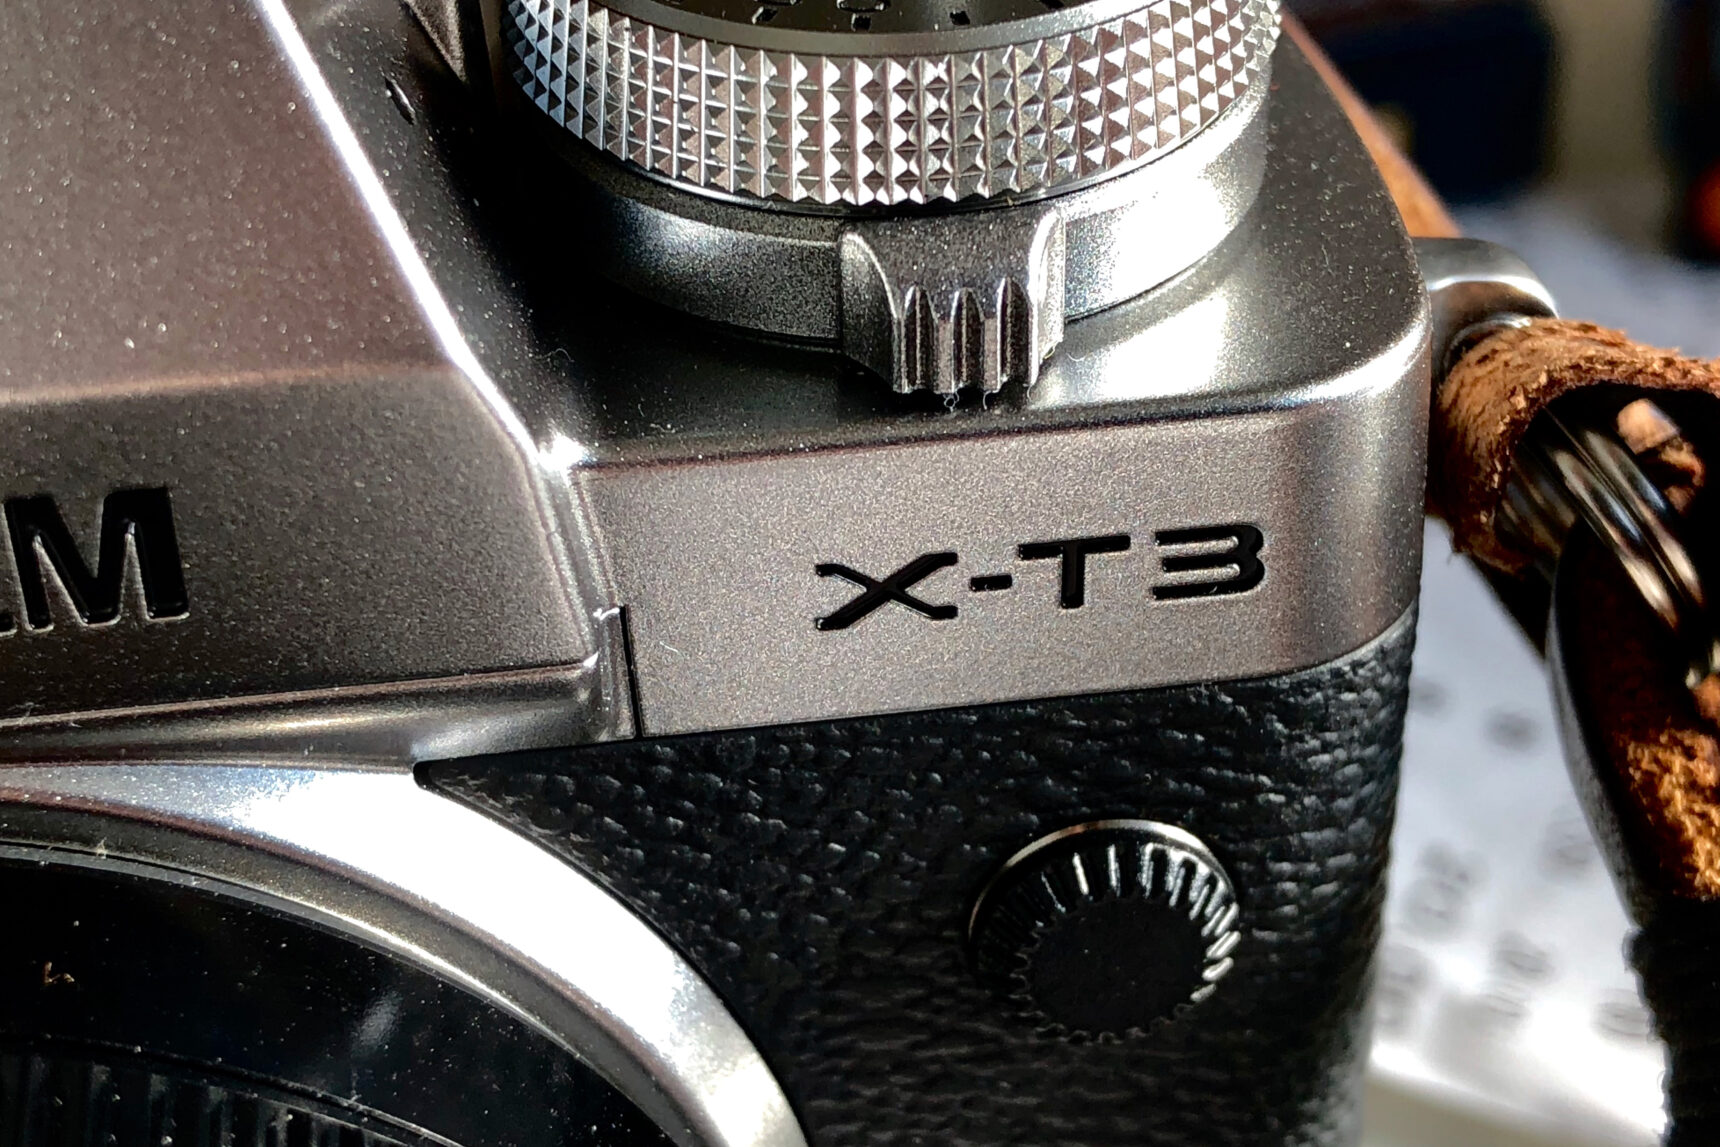 Fuji X-T3 Street Photography Review